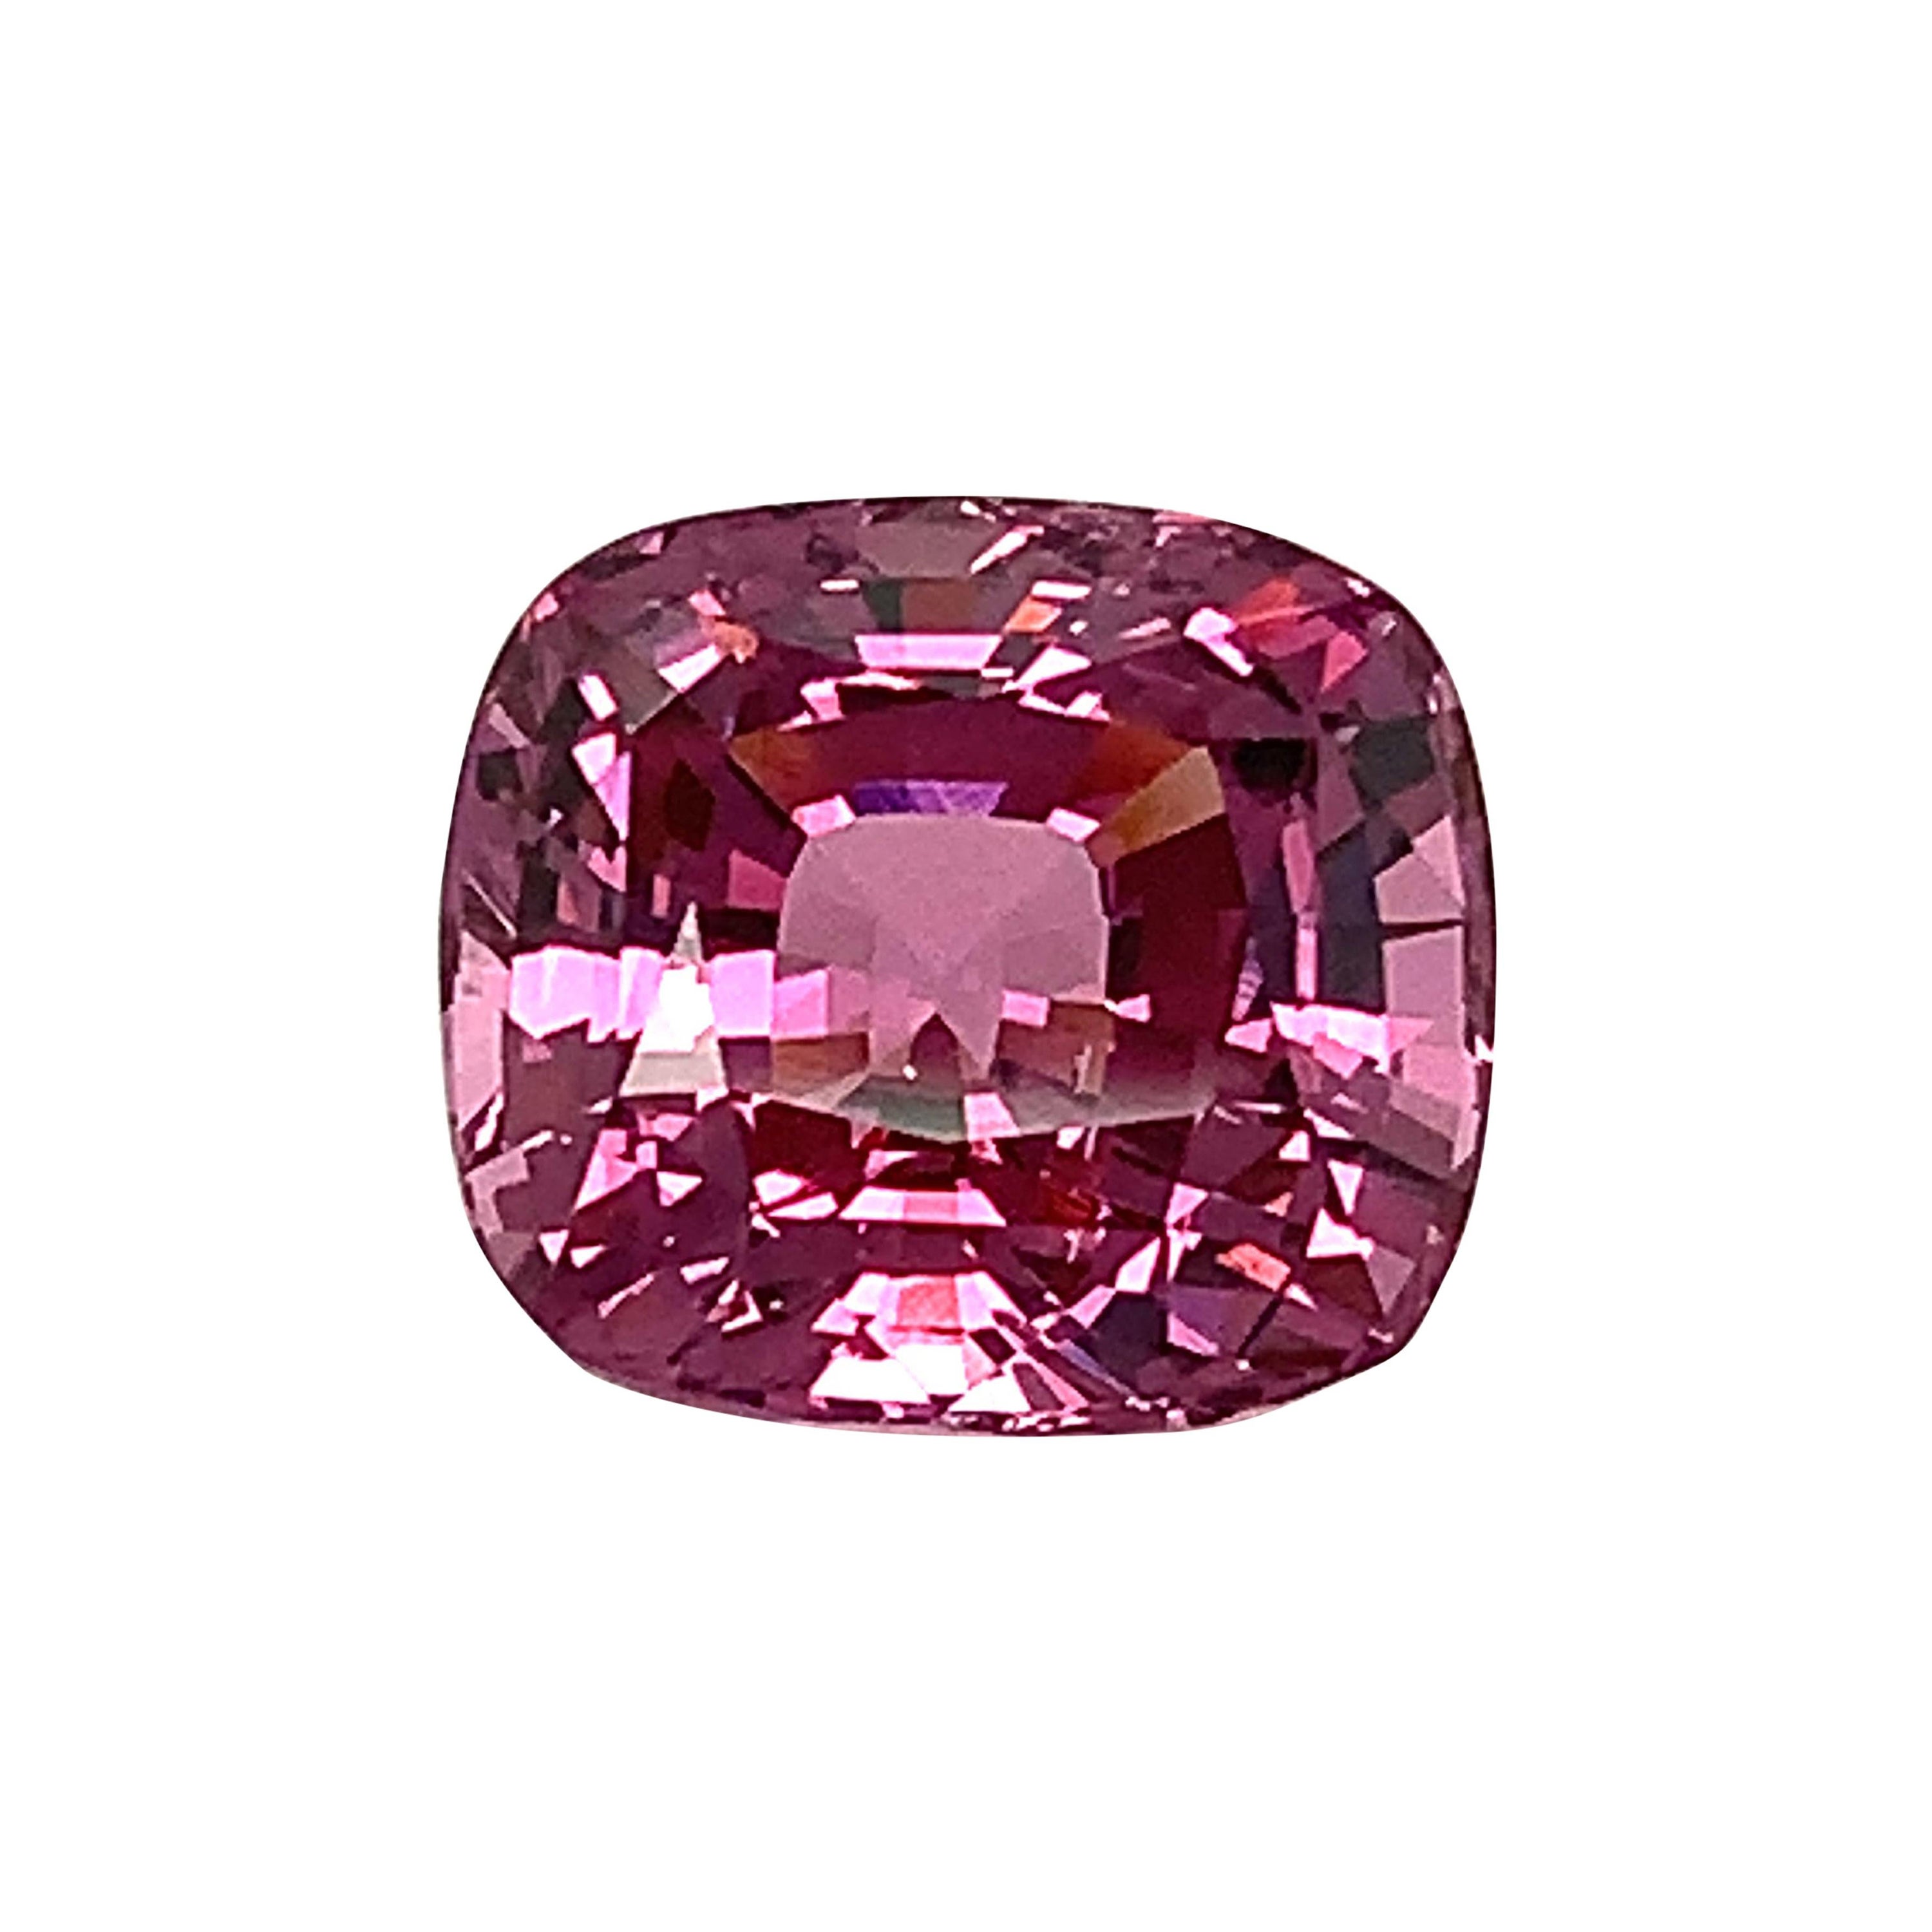 Unheated 10.21 Carat Pink Purple Spinel, Loose Gemstone, GIA Certified ...A